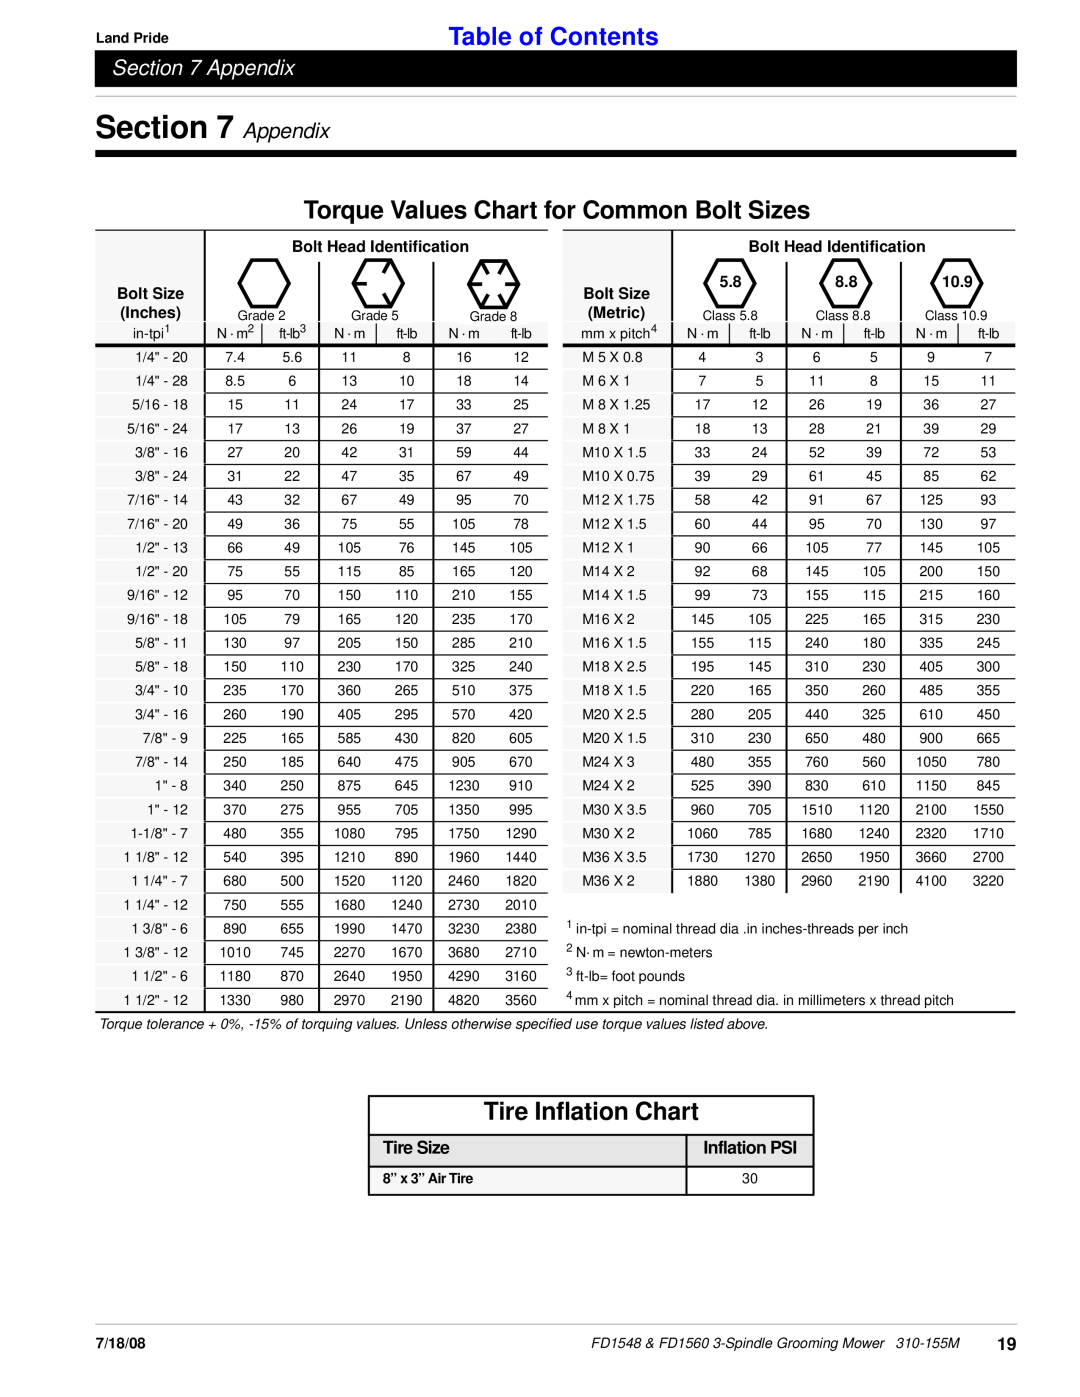 Land Pride fd1548 Appendix, Torque Values Chart for Common Bolt Sizes, Tire Inflation Chart, Tire Size, Inflation PSI 